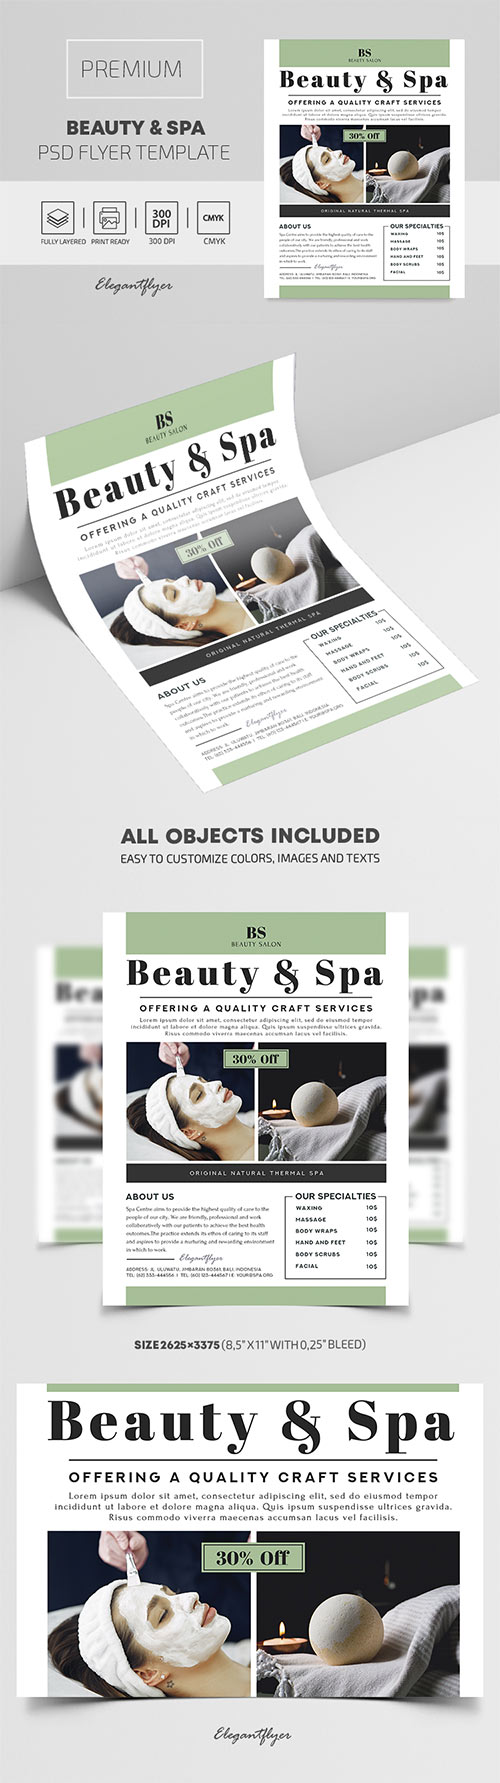 Beauty and Spa - Premium PSD Flyer Template